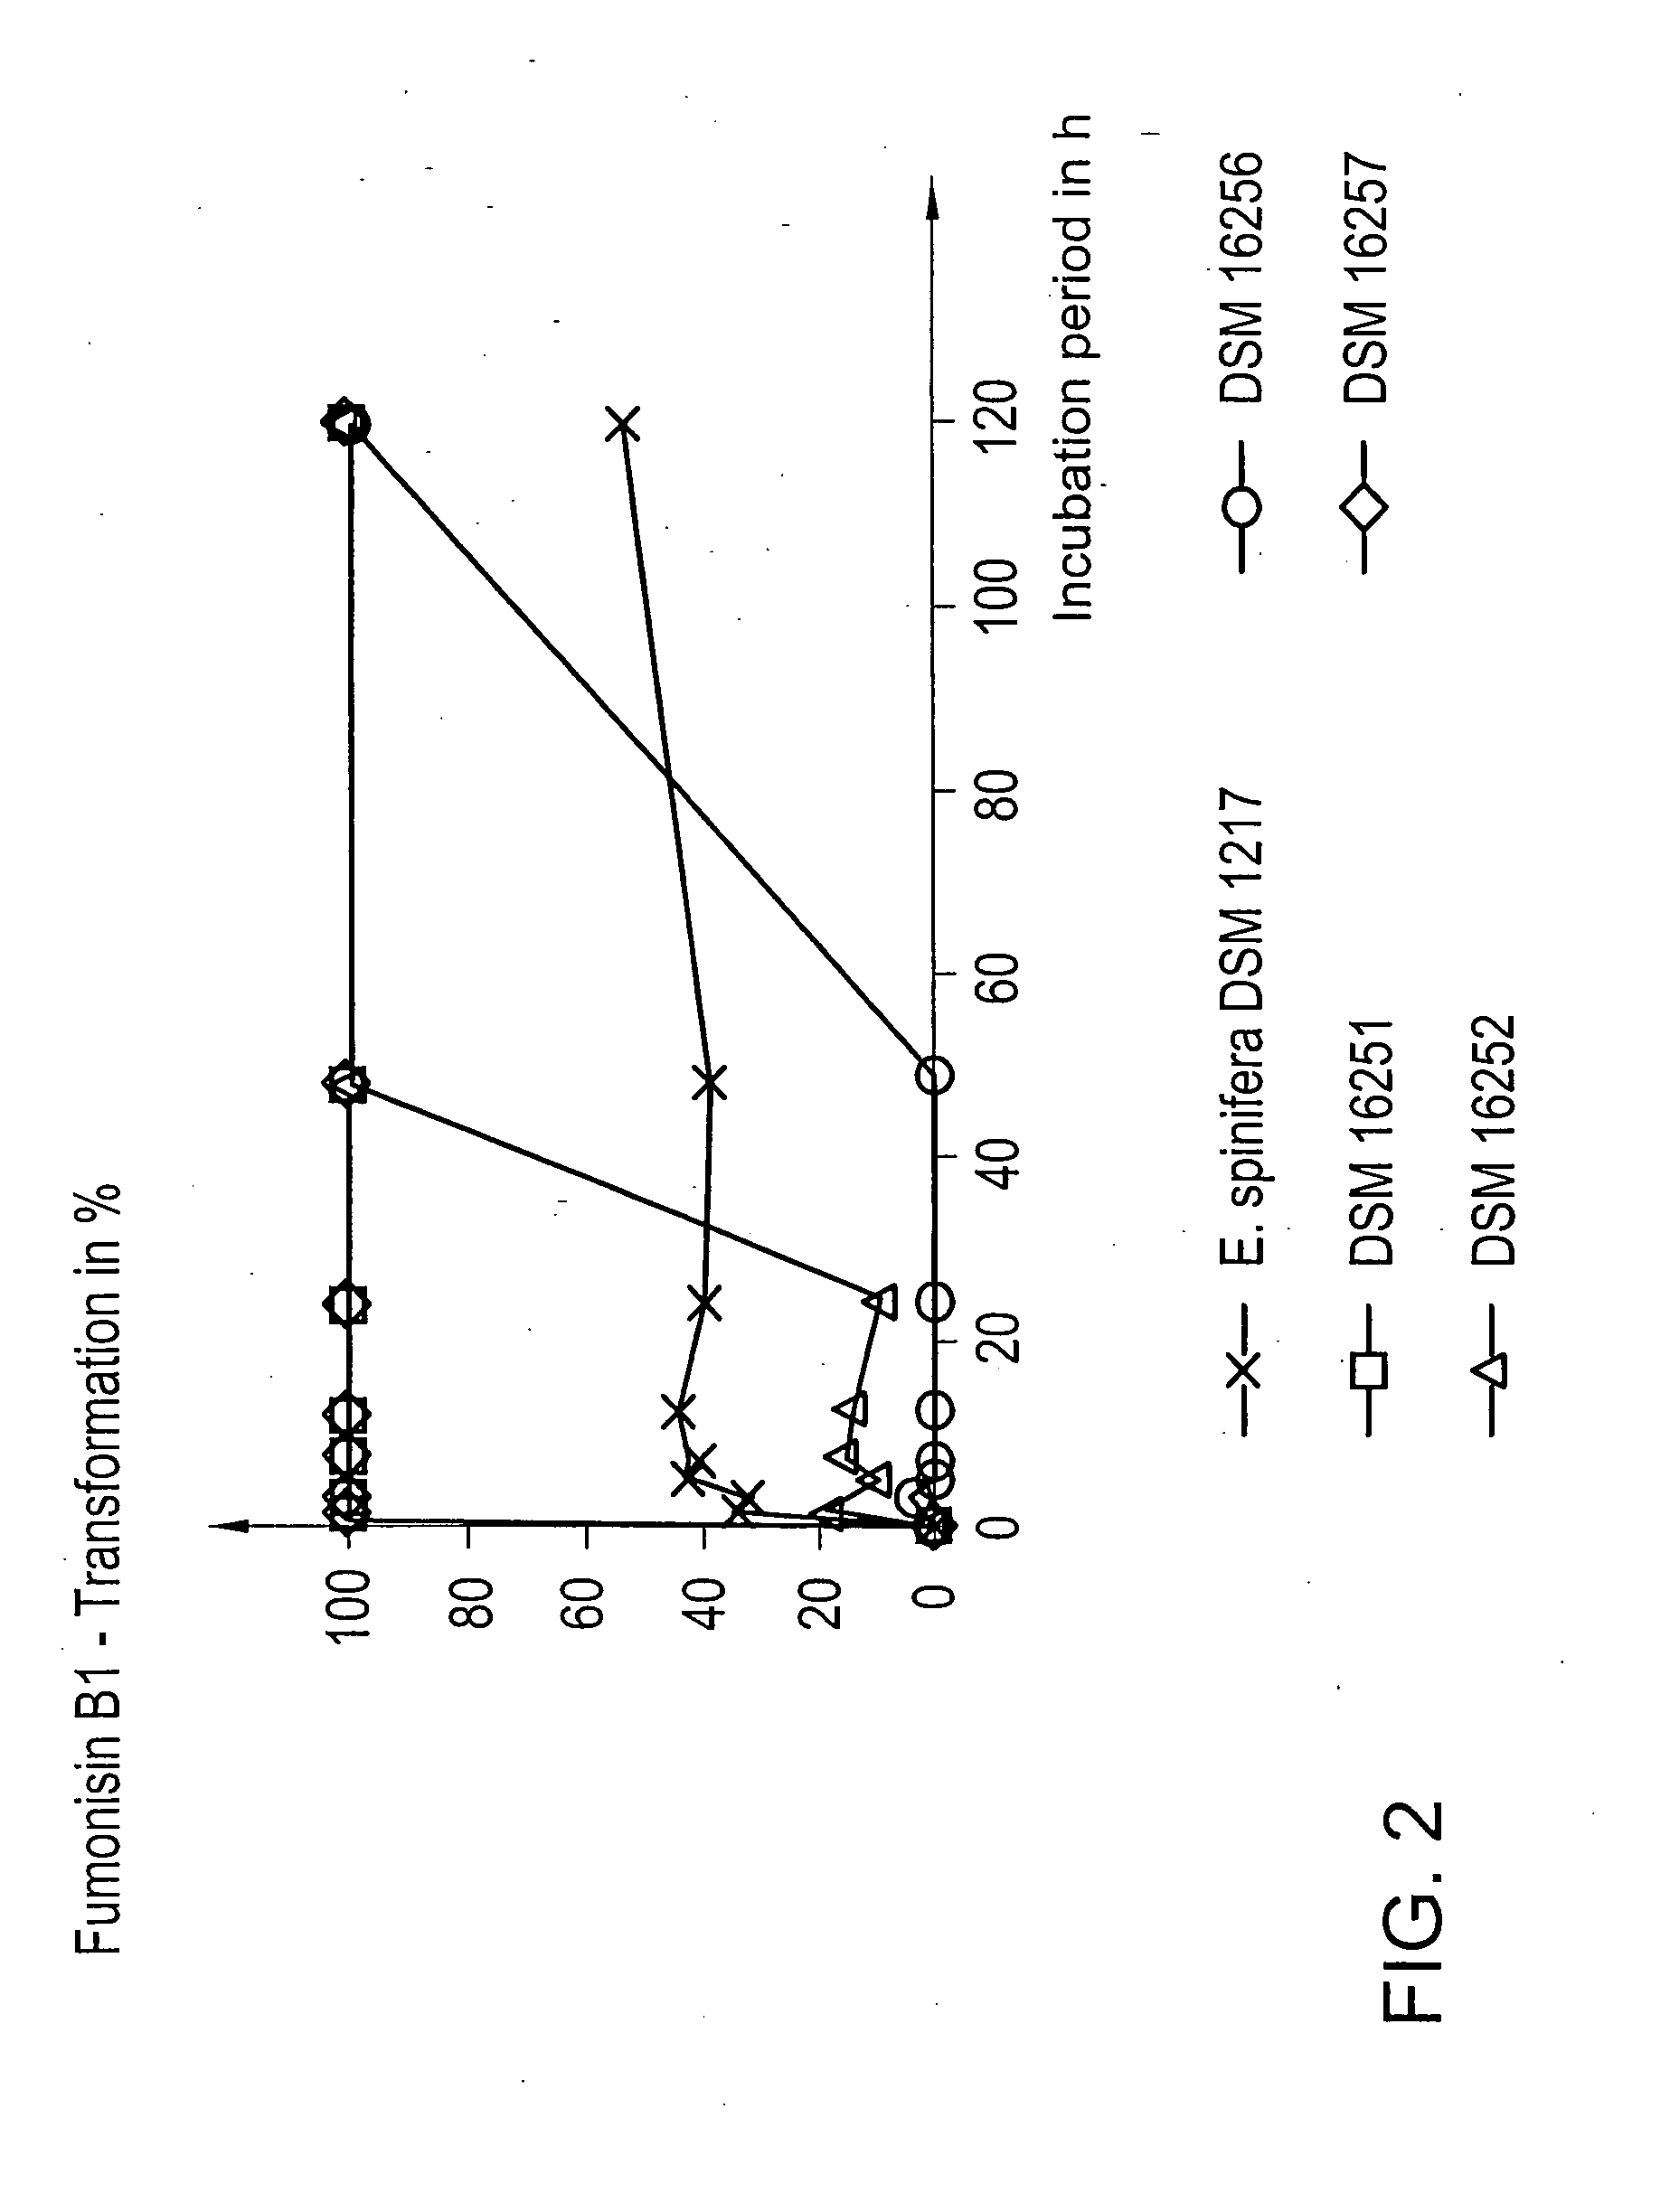 Micro-organism for decontaminating fumonisins and its use, method for decontaminating fumonisins, and feed additive containing said micro-oragnism